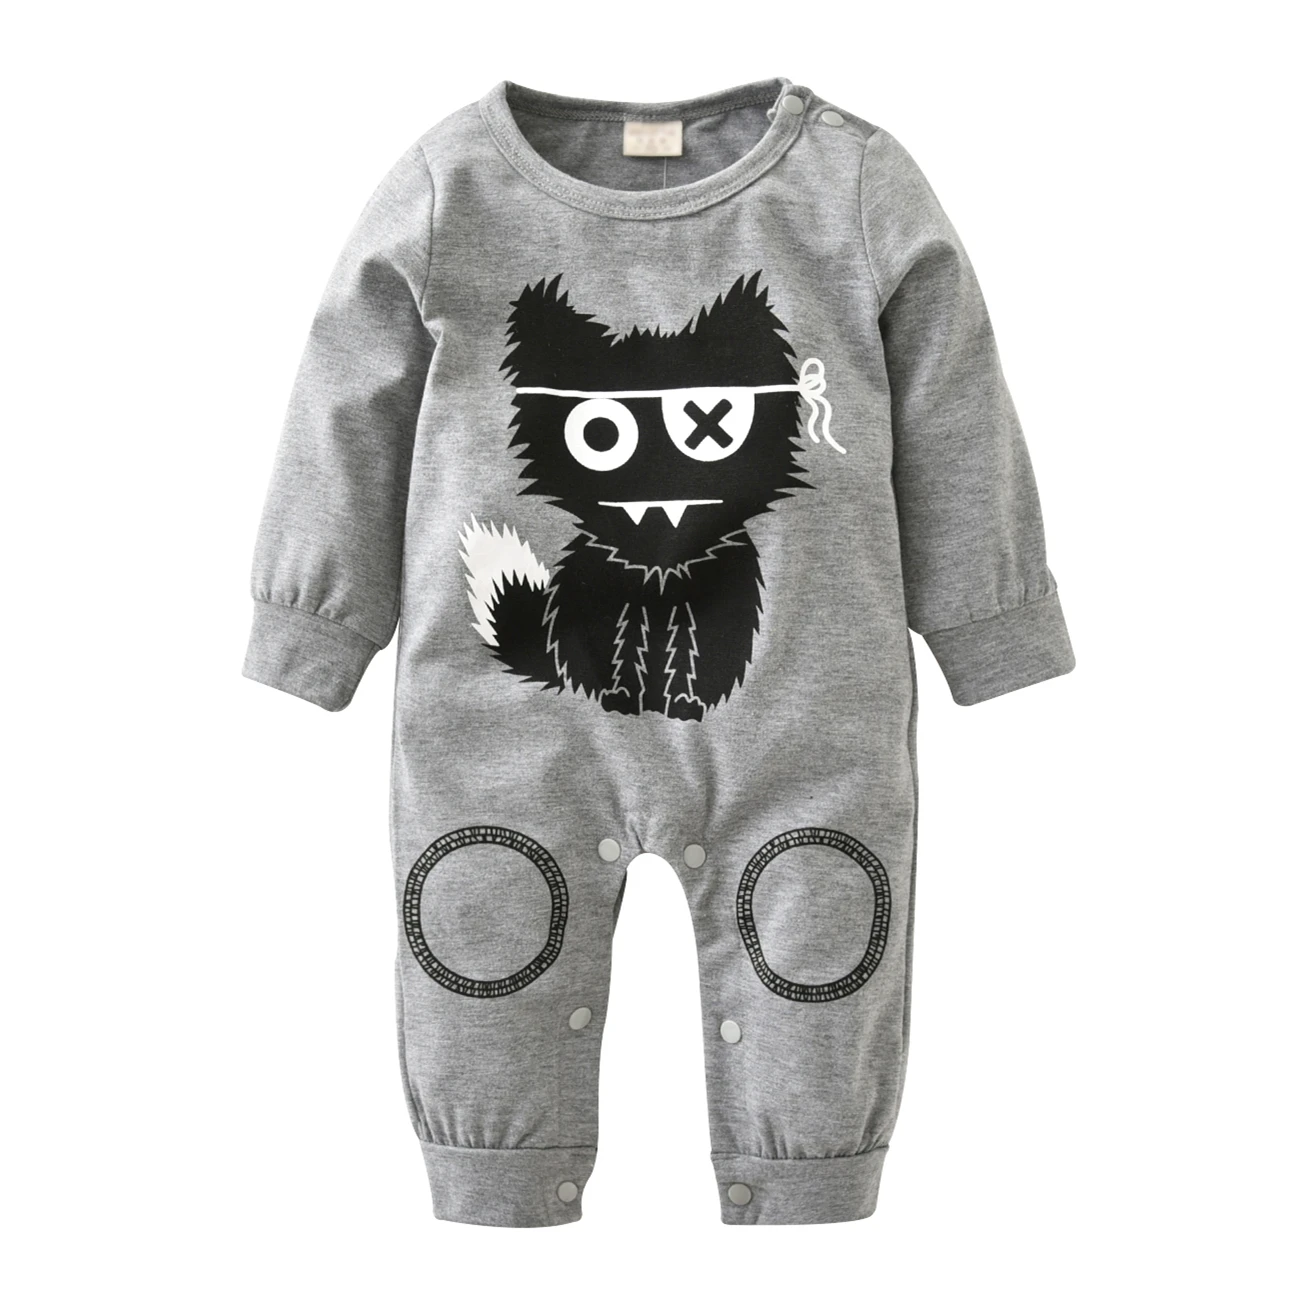 Newborn Baby Boys Girls Romper Cartoon Print Cotton Long Sleeve Jumpsuit Infant Clothing Pajamas Toddler Baby Clothes Outfits best Baby Bodysuits Baby Rompers